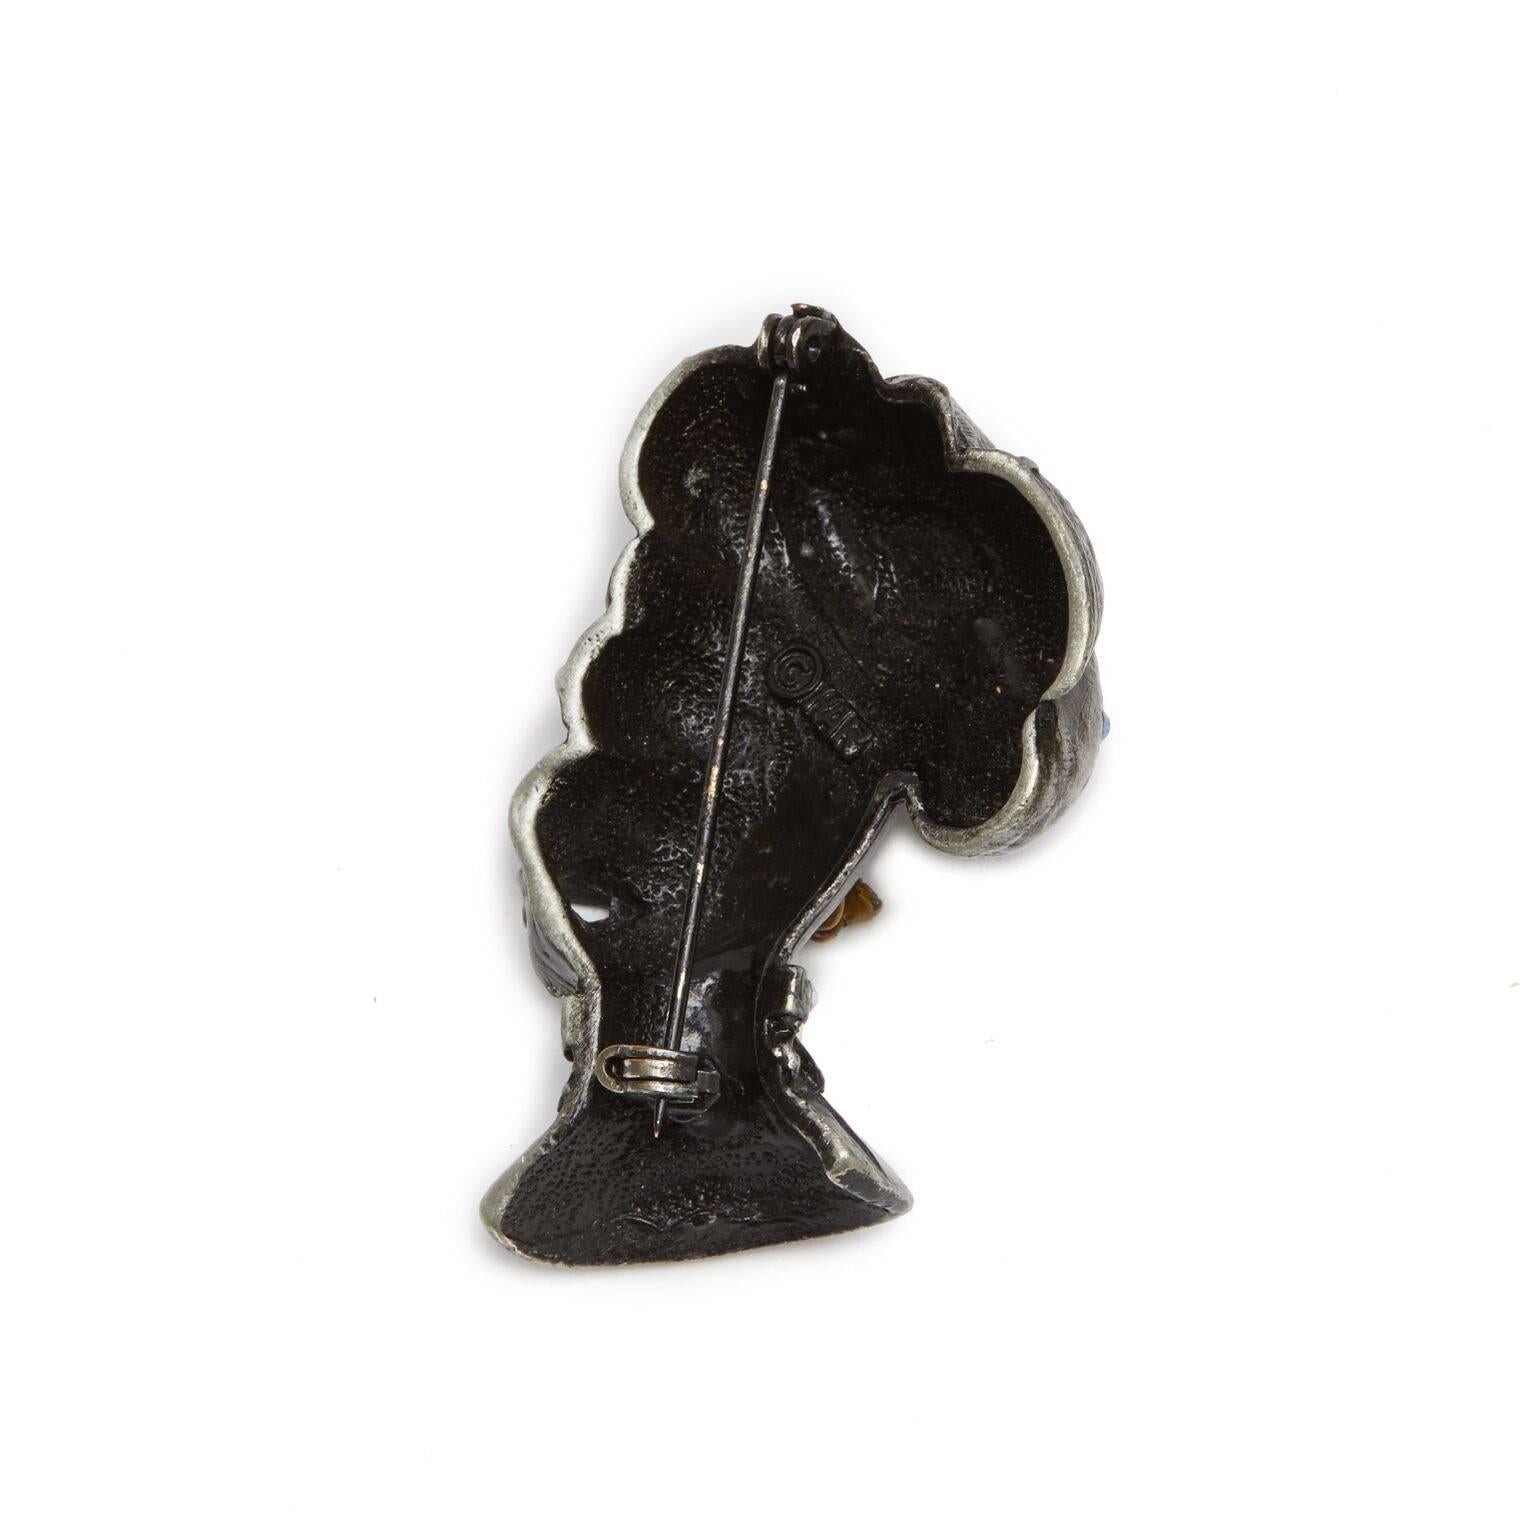 This beguiling Har 1960s pewter brooch with fantasy rhinestones is a desirable trademark piece for this much loved unorthodox and mysterious jewellery designer. Originating from New York in the 1950s with an exotic range of designs, Har's